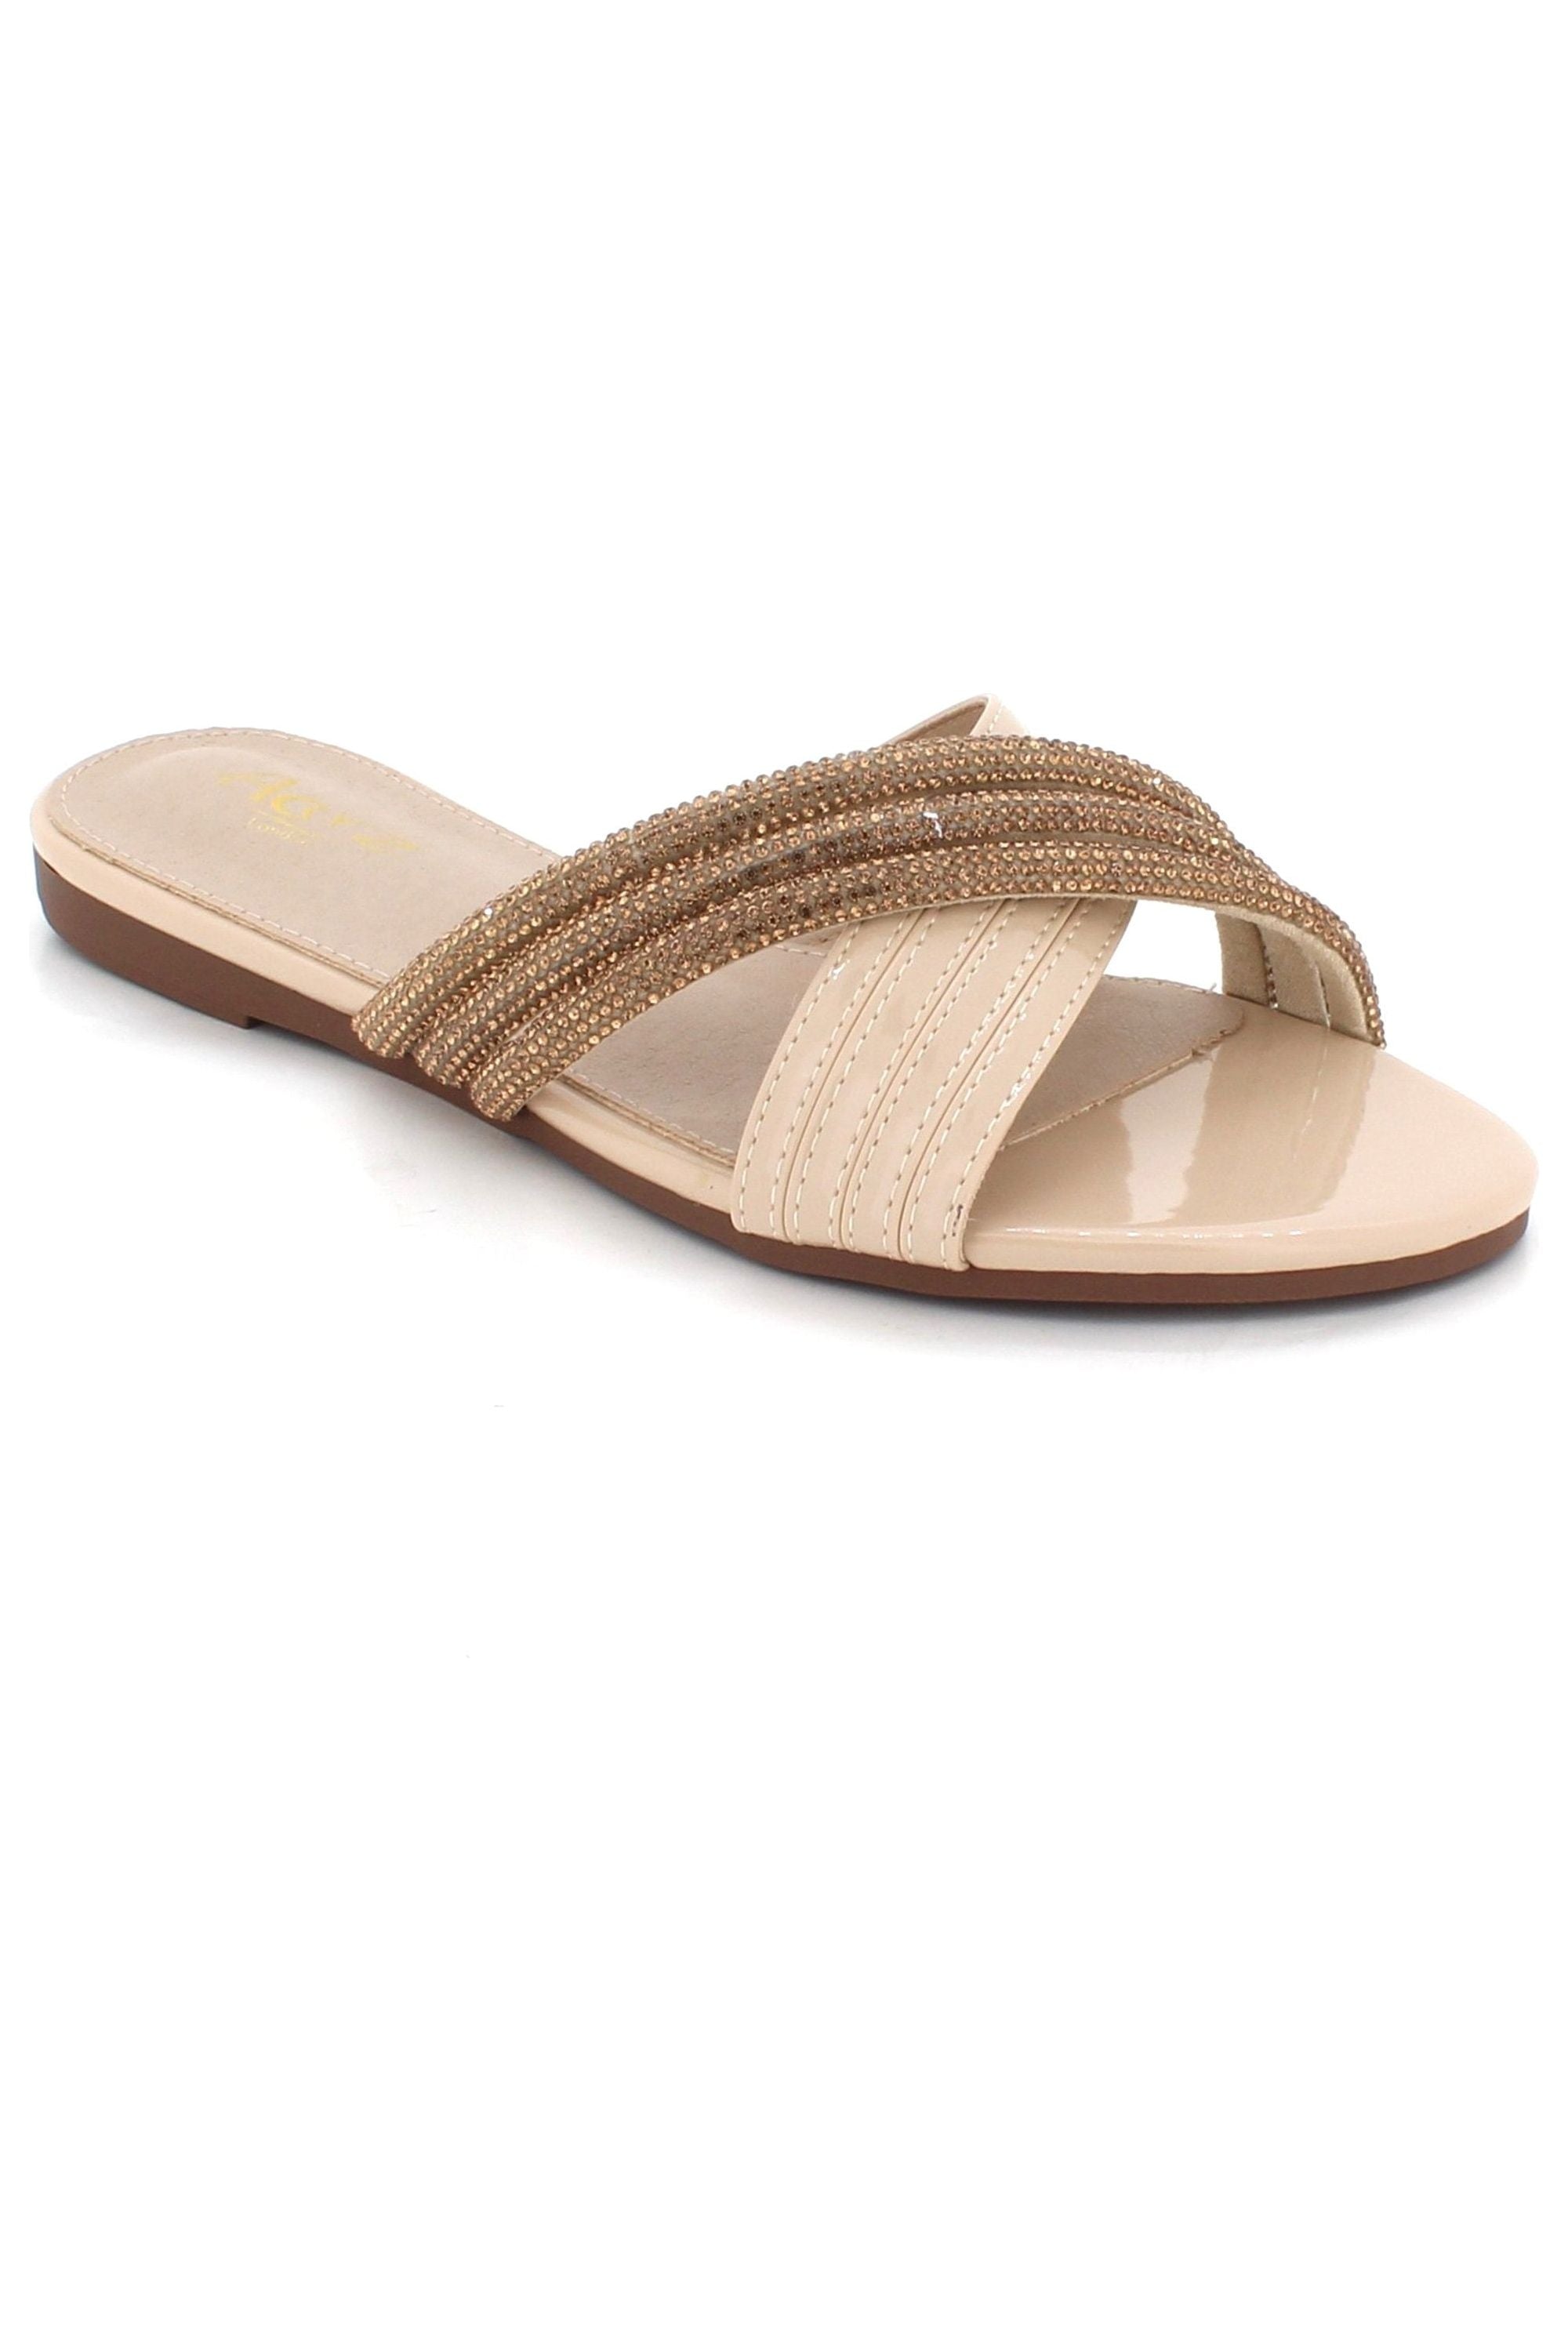 Fashionable Cross-strap Open Toe Party Holiday Summer Beach Casual Comfort Flat L7592